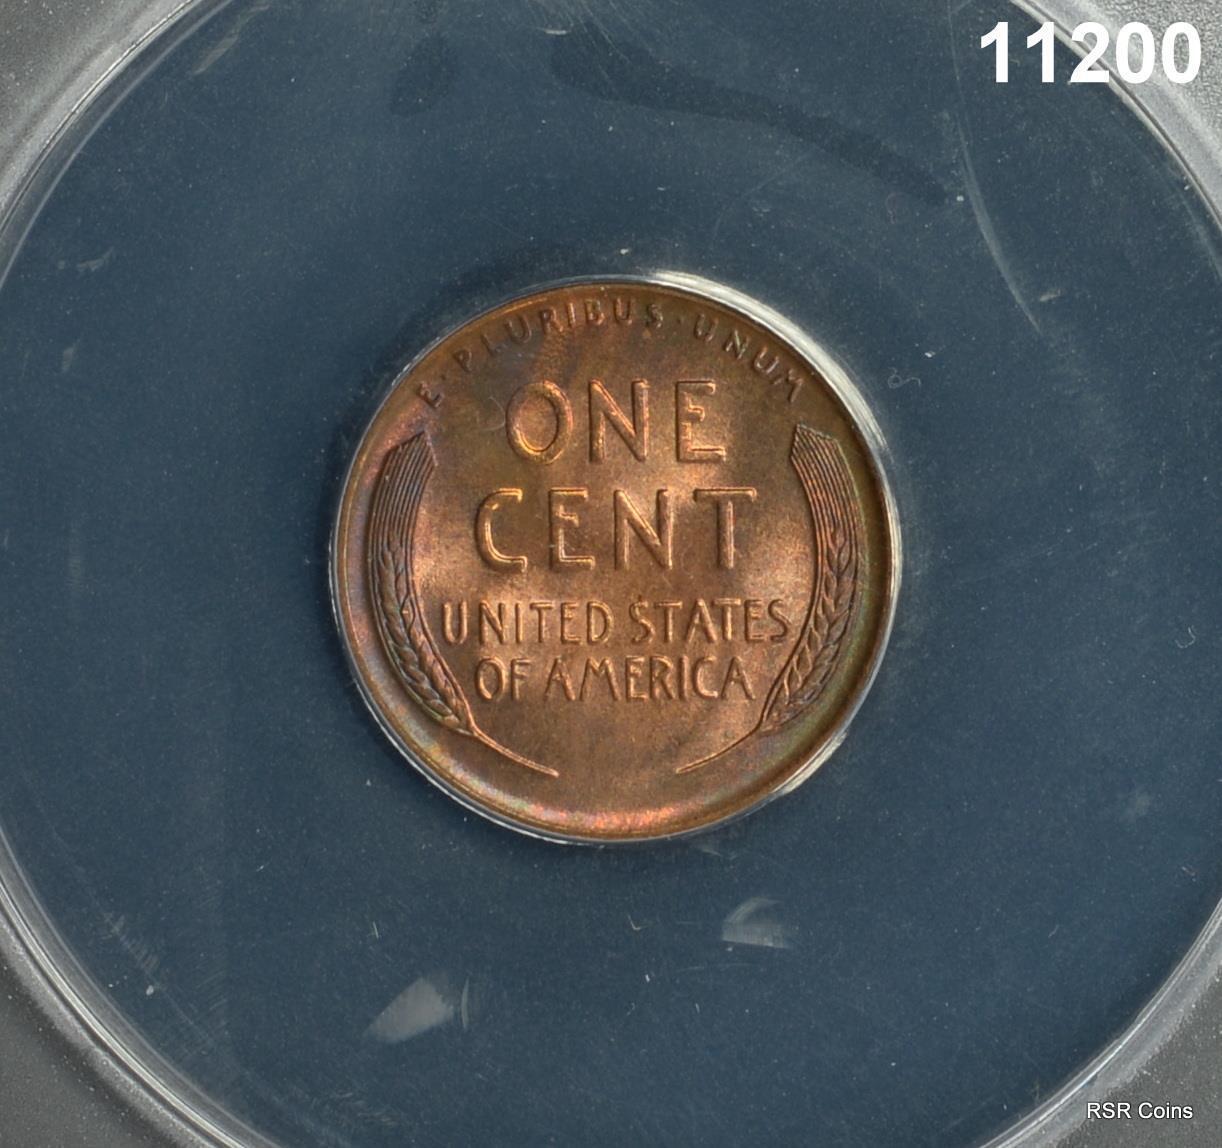 1942 D LINCOLN CENT ANACS CERTIFIED MS64 RB! #11200